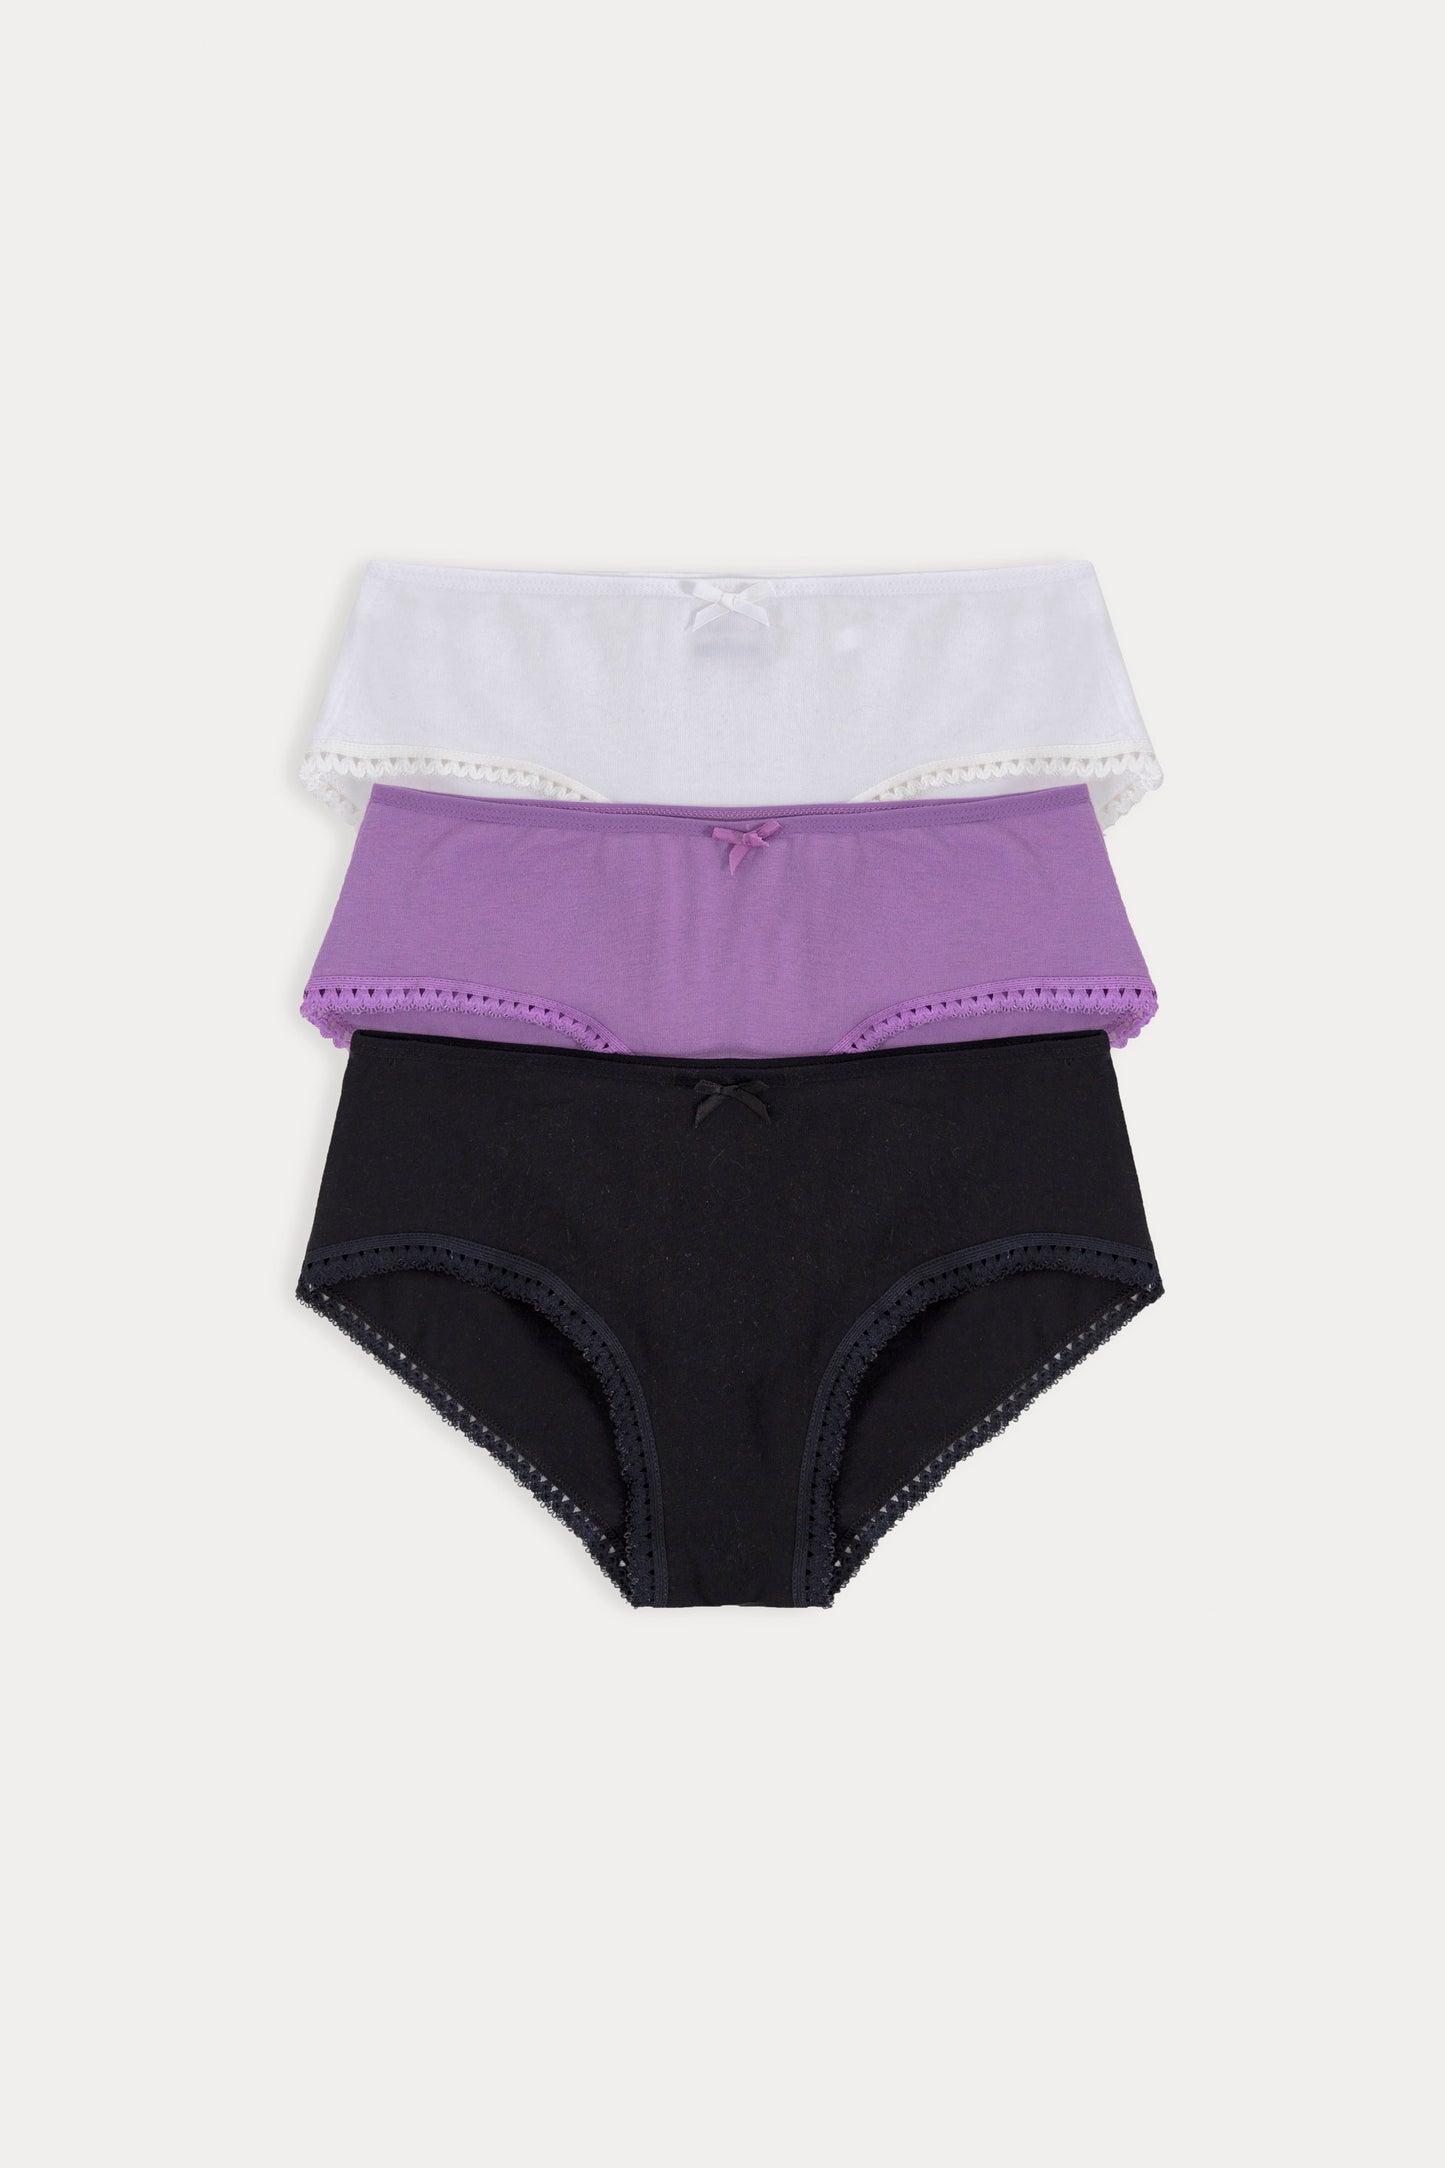 Pack of Basic Briefs